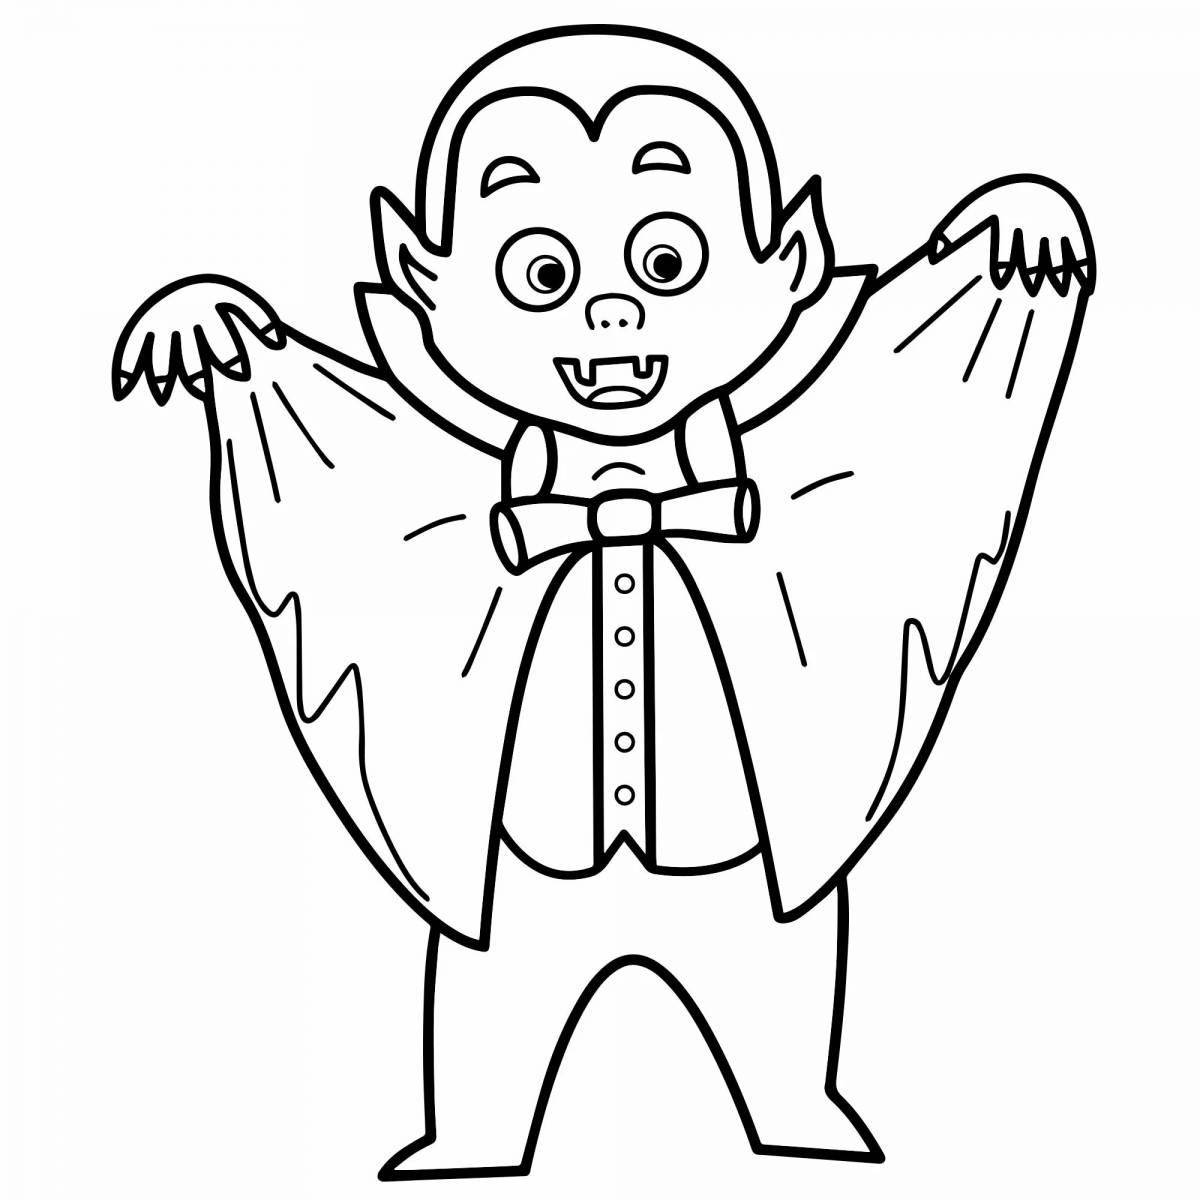 Terrible vampire coloring page for kids